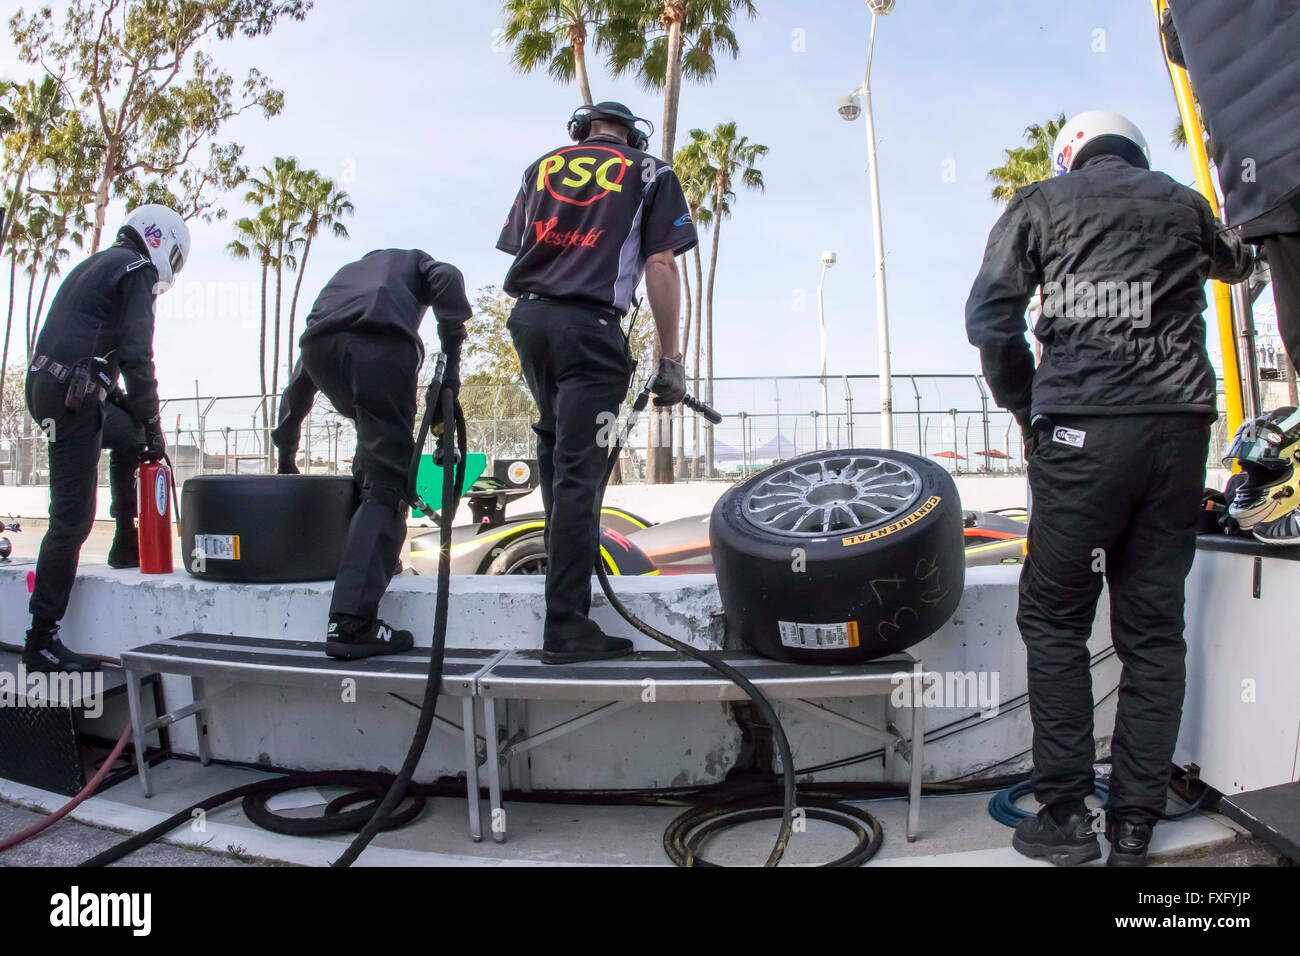 Long Beach, CA, USA. 15th Apr, 2016. Long Beach, CA - Apr 15, 2016: The IMSA WeatherTech Sportscar Championship teams take to the track for a practice session for the 42nd Annual Toyota Grand Prix of Long Beach on the Streets of Long Beach in Long Beach, CA. Credit:  csm/Alamy Live News Stock Photo